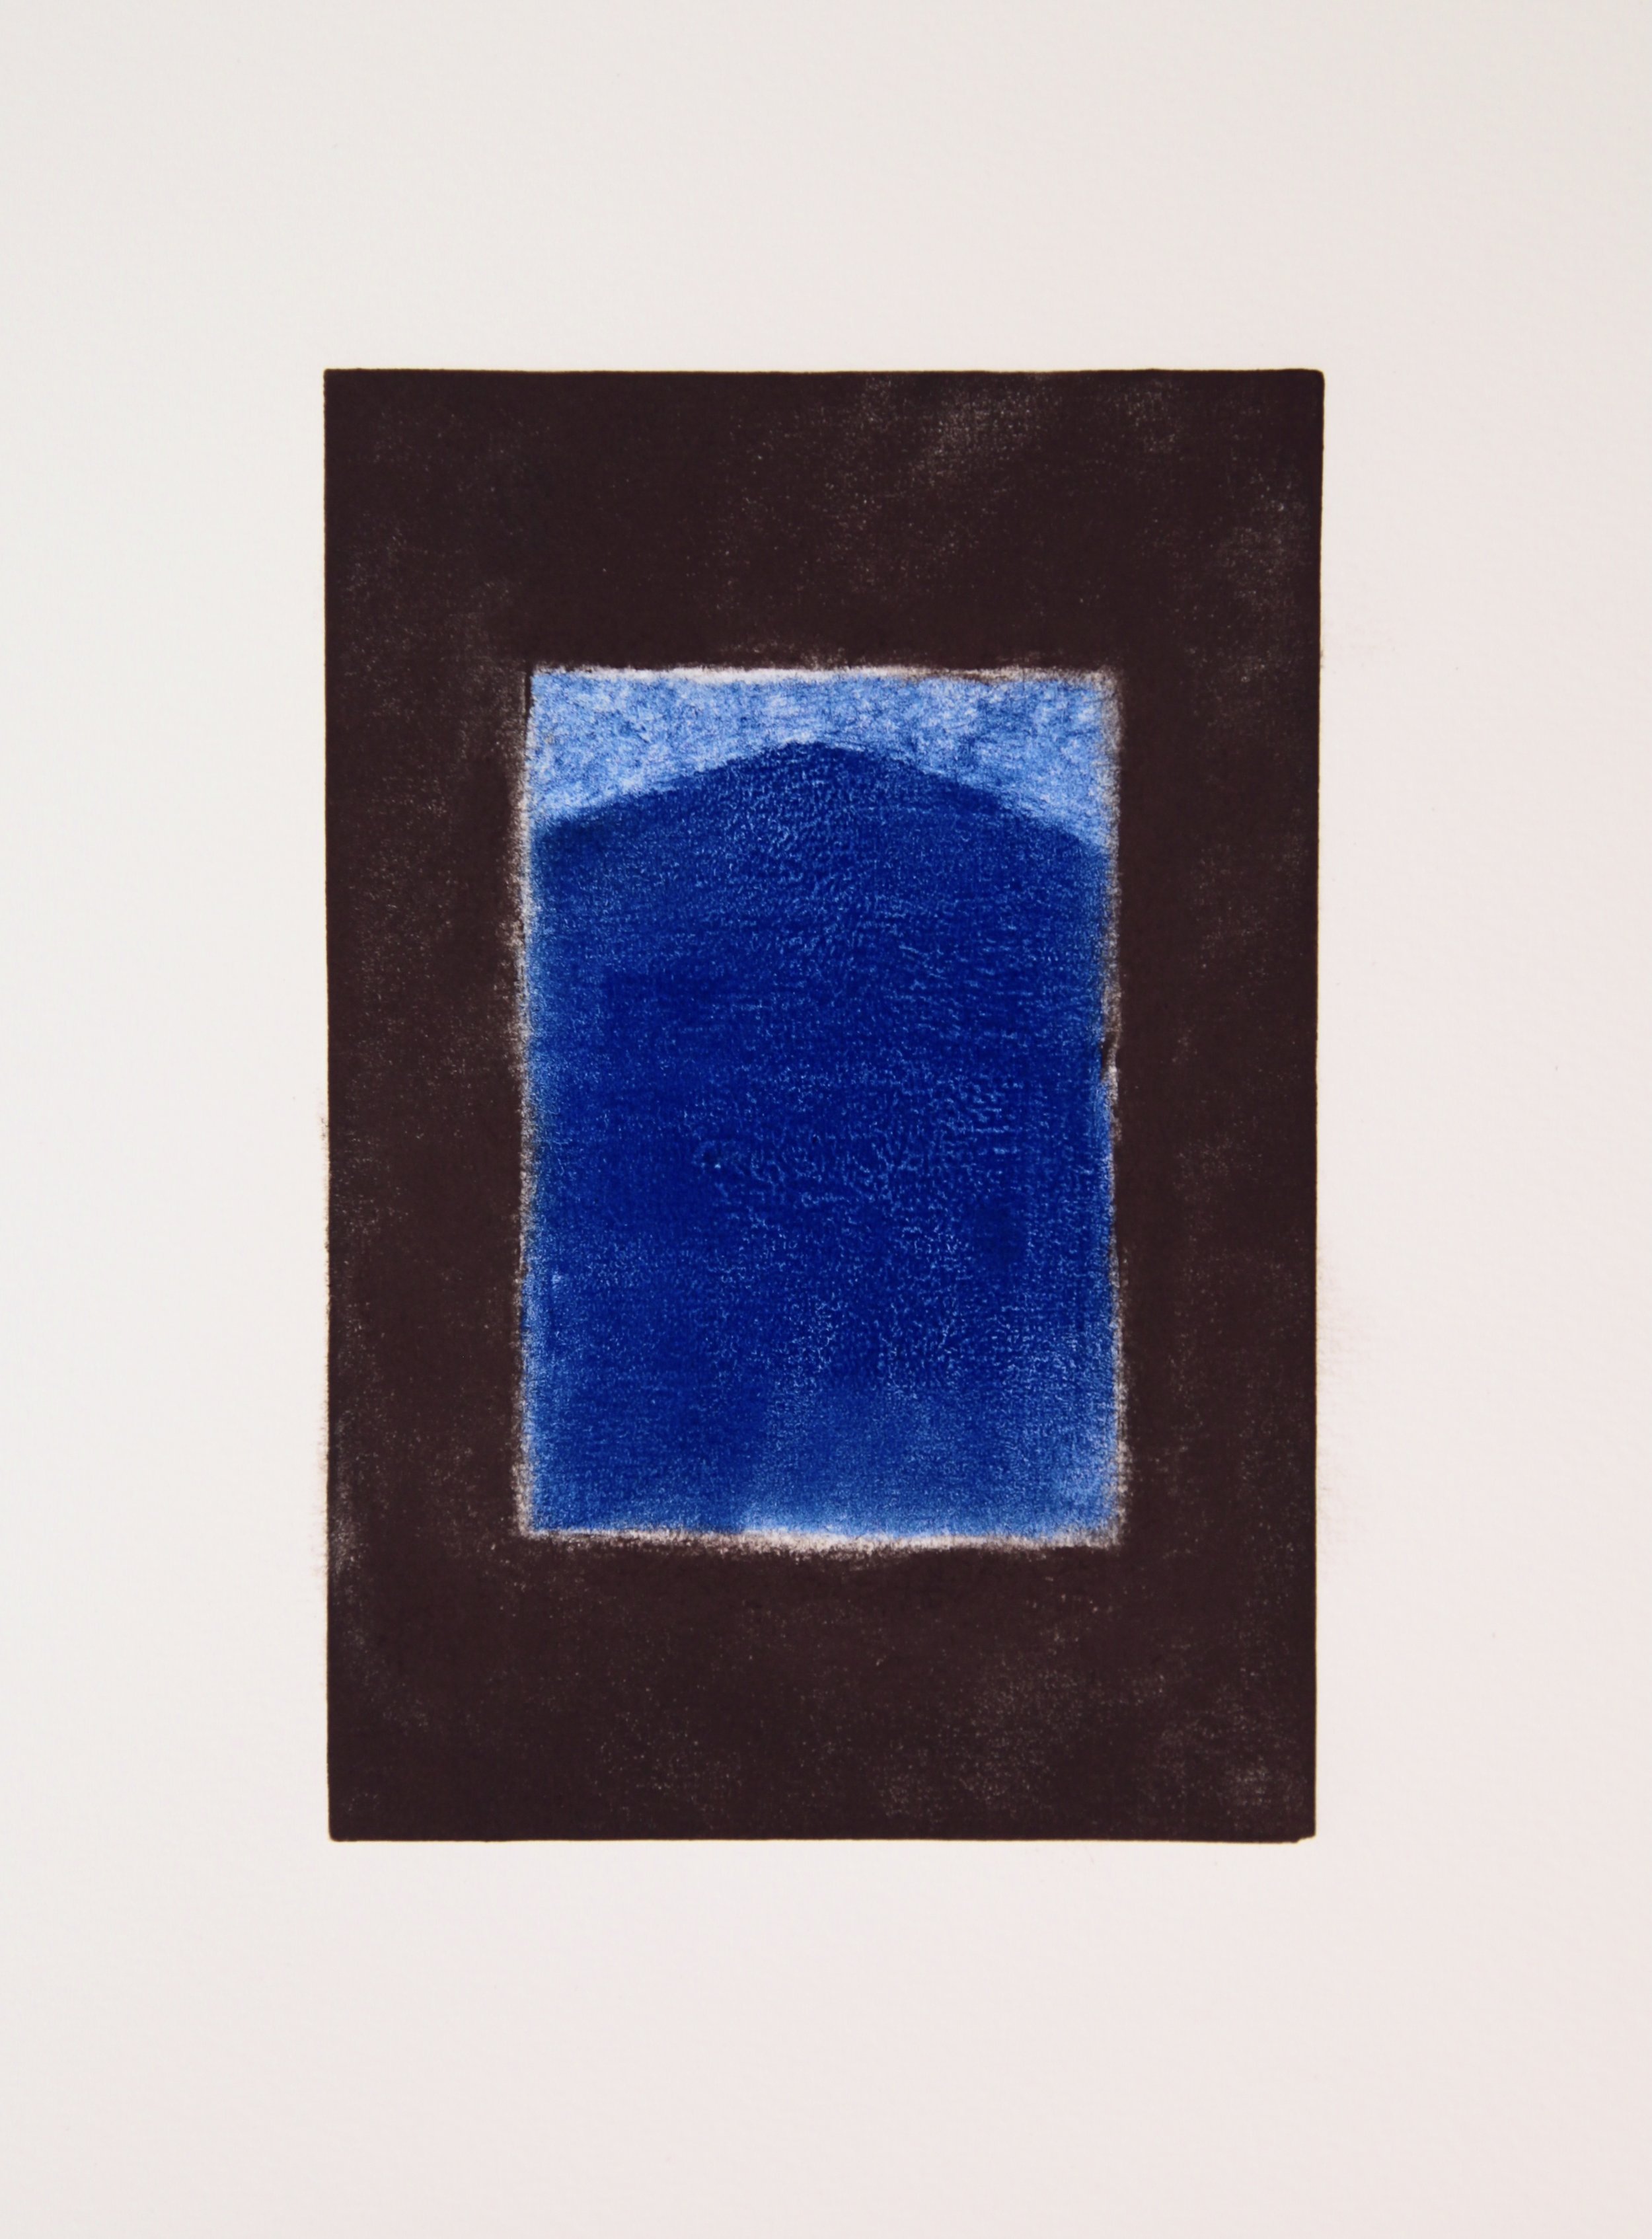   Window,  2022, monotype on paper, plate size 15 x 10.5cm 